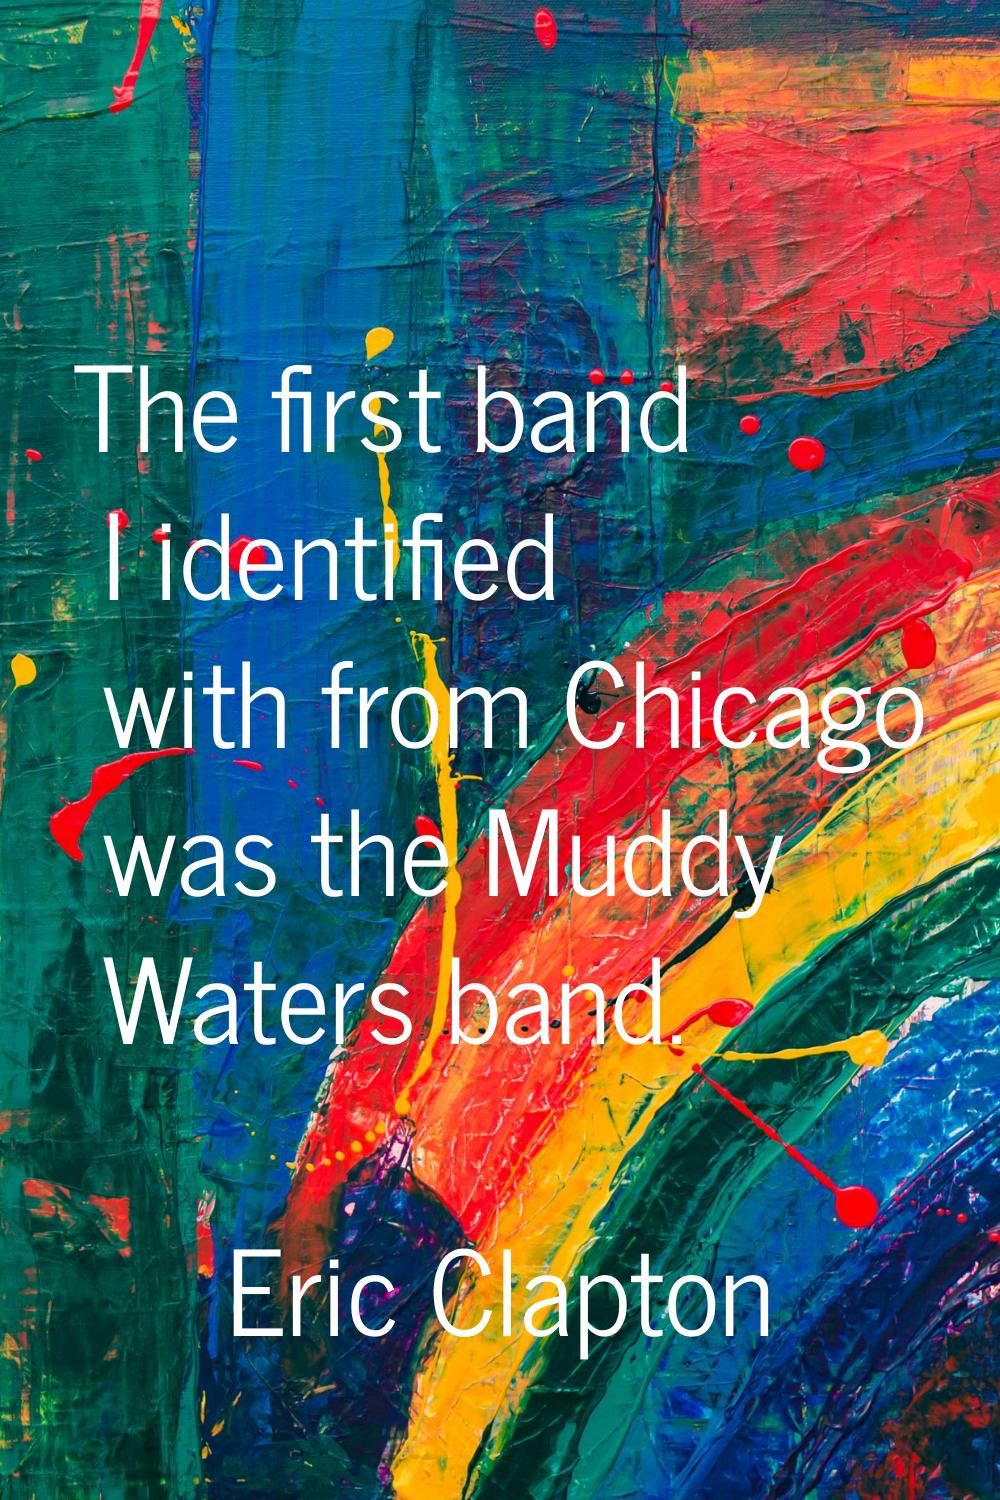 The first band I identified with from Chicago was the Muddy Waters band.